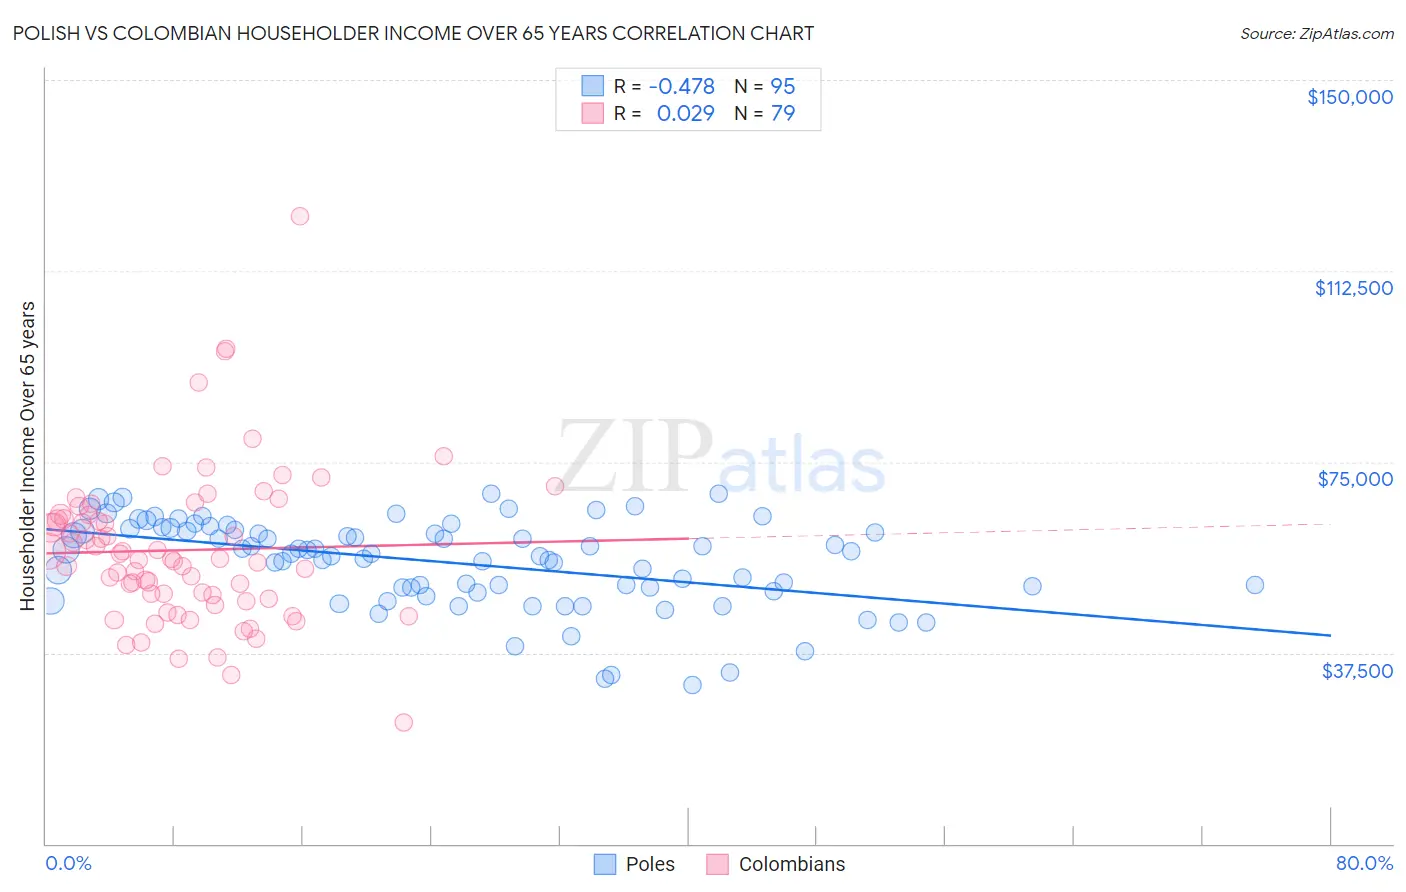 Polish vs Colombian Householder Income Over 65 years